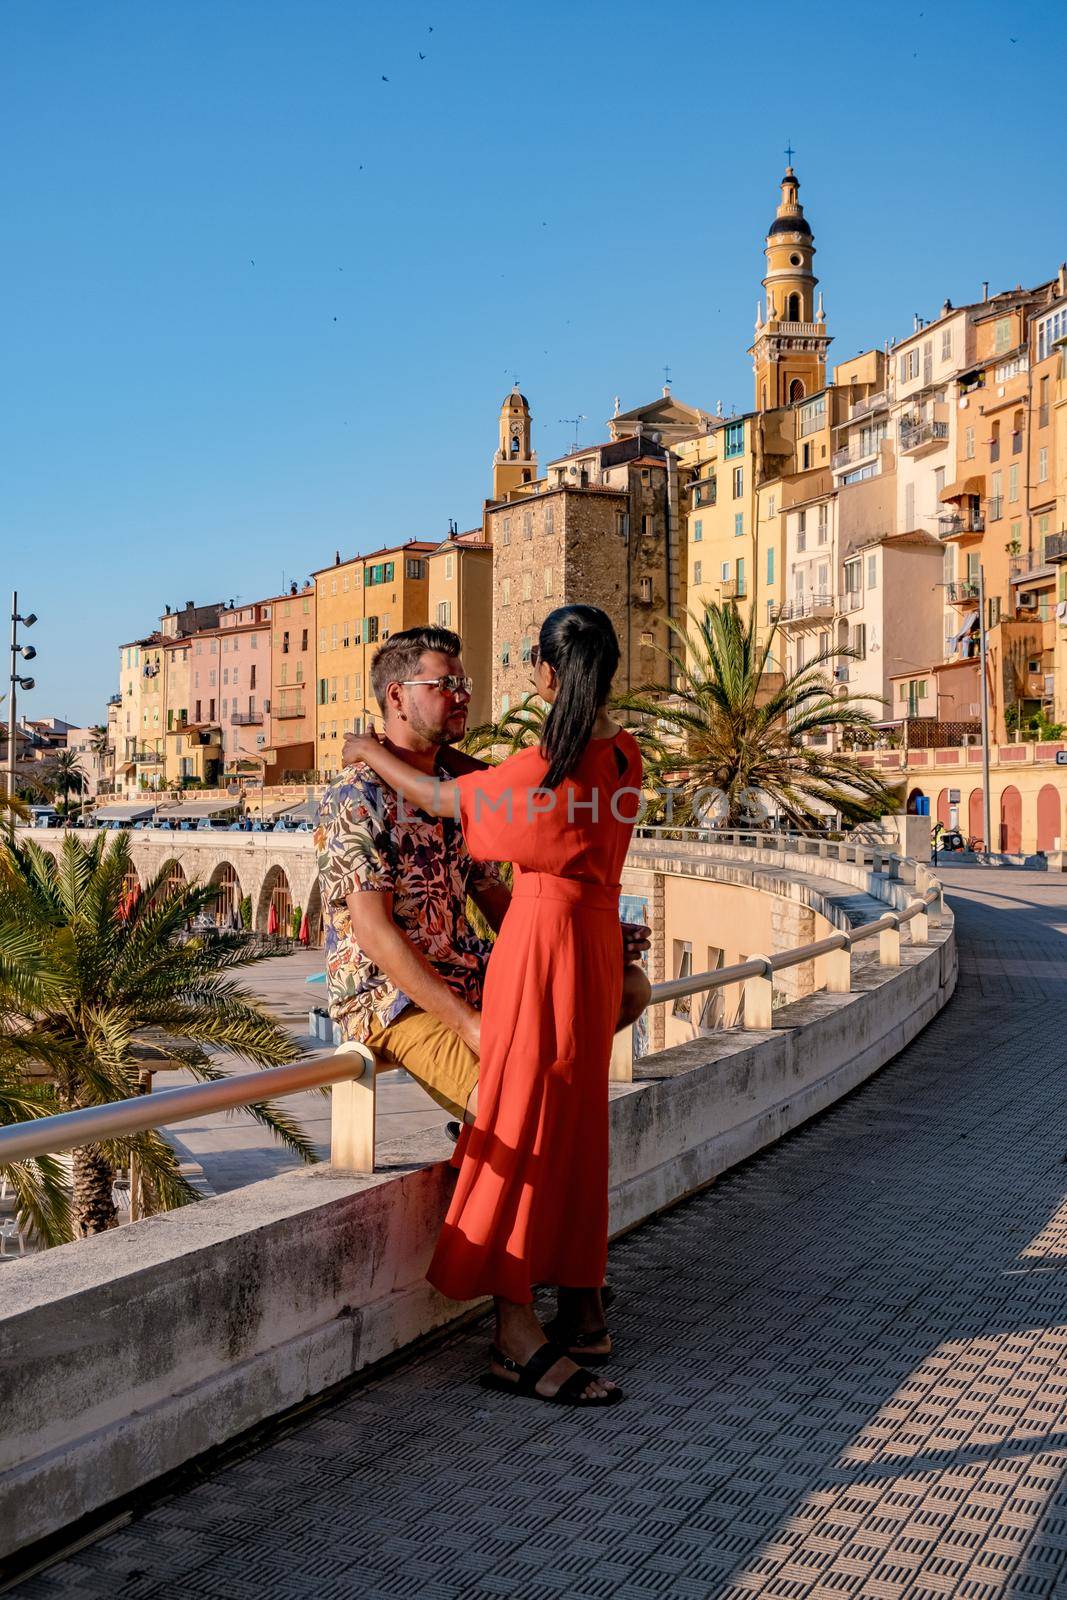 View on old part of Menton, Provence-Alpes-Cote d'Azur, France Europe during summer, couple men and woman on vacation at Menton France